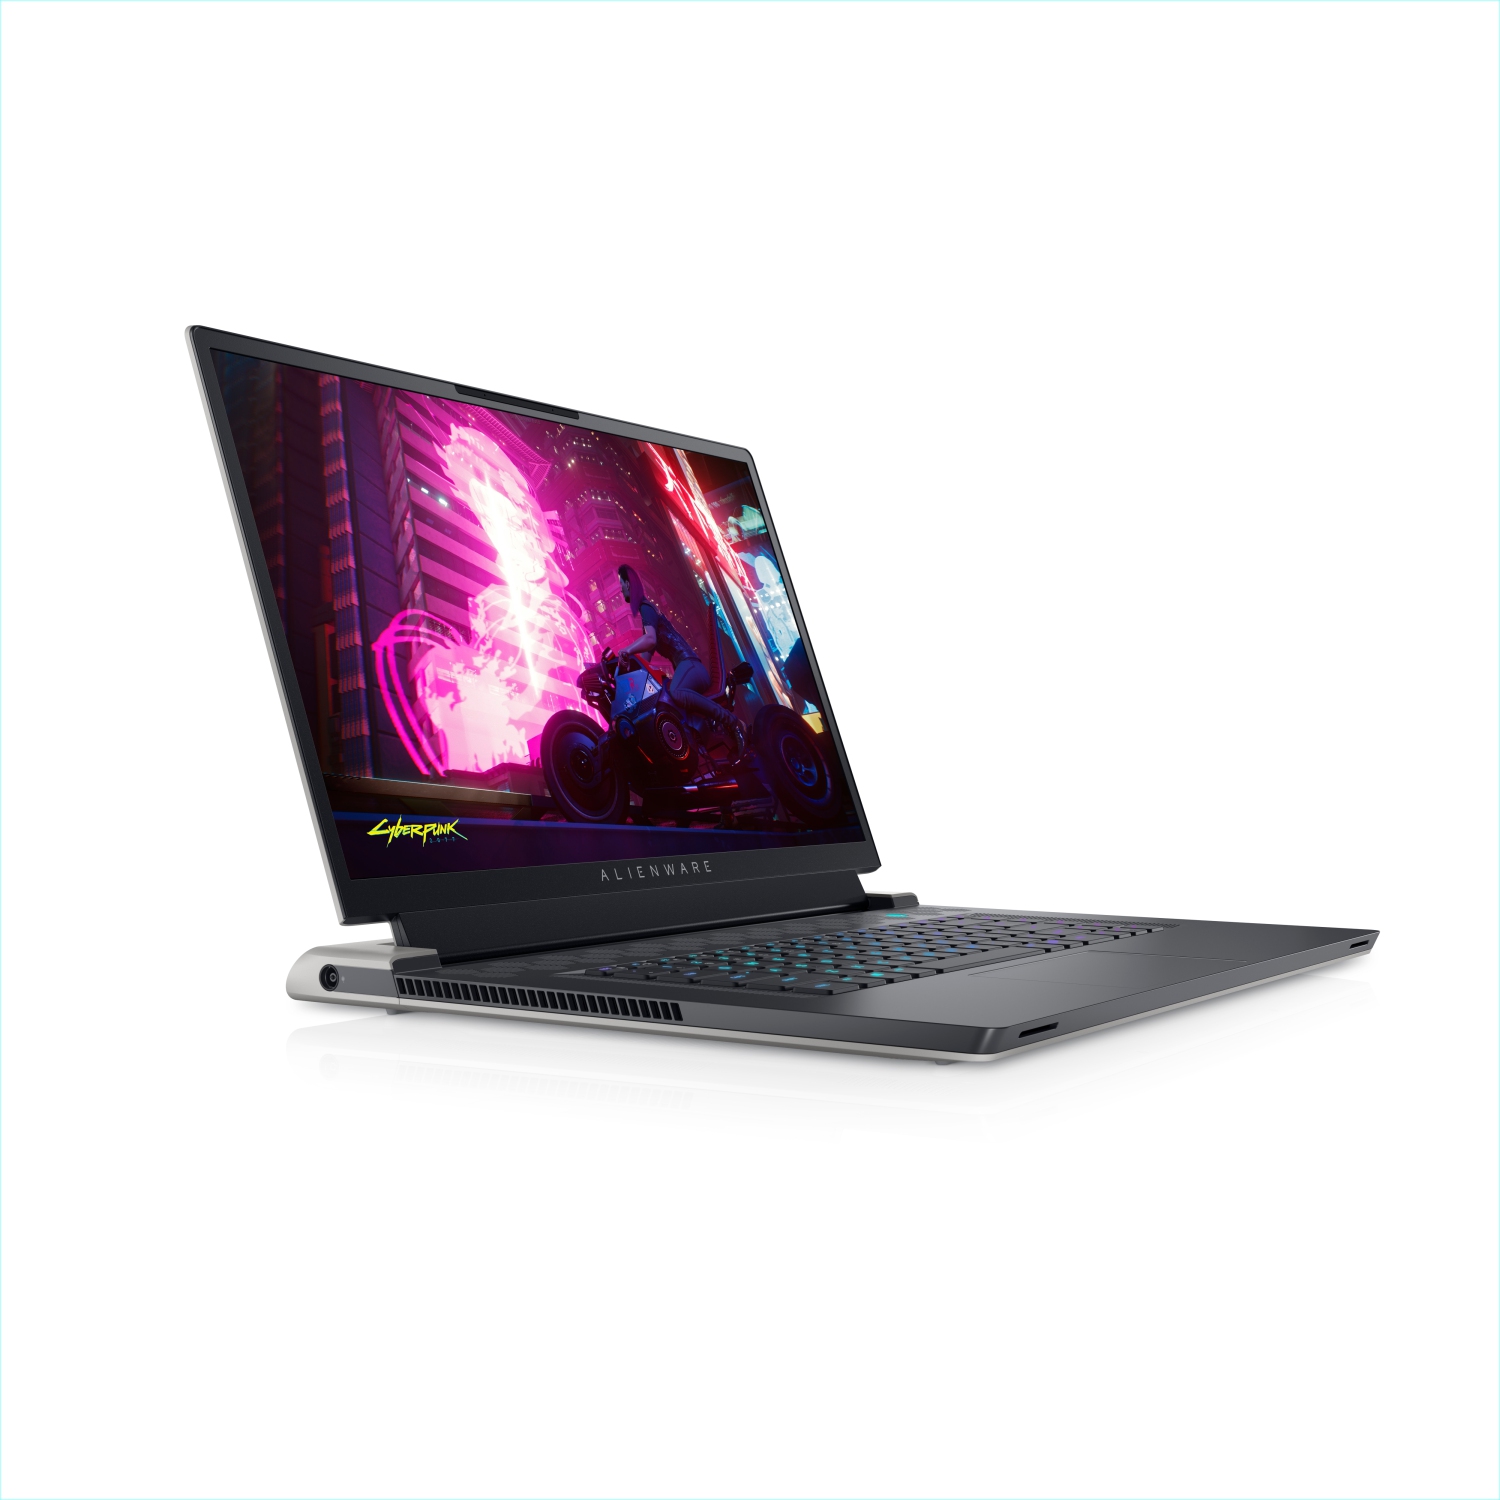 Refurbished (Excellent) - Dell Alienware X17 R1 Gaming Laptop (2021), 17.3" FHD, Core i7, 512GB SSD, 16GB RAM, RTX 3070, 8 Cores @ 4.6 GHz, 11th Gen CPU Certified